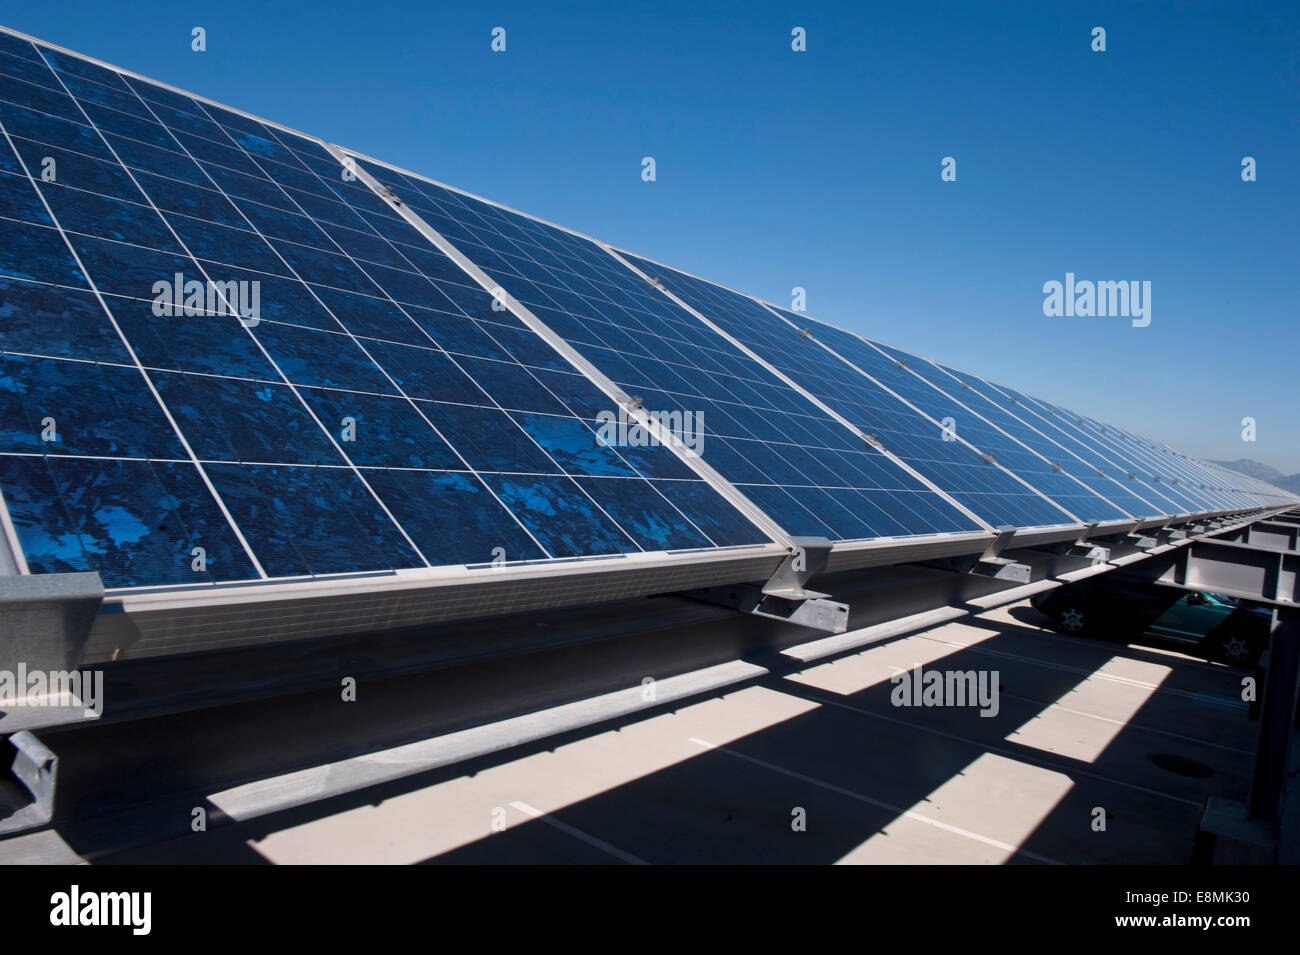 Naples, Italy, October 17, 2013 - A view of solar panels installed on top of a parking garage at Naval Support Activity Naples C Stock Photo